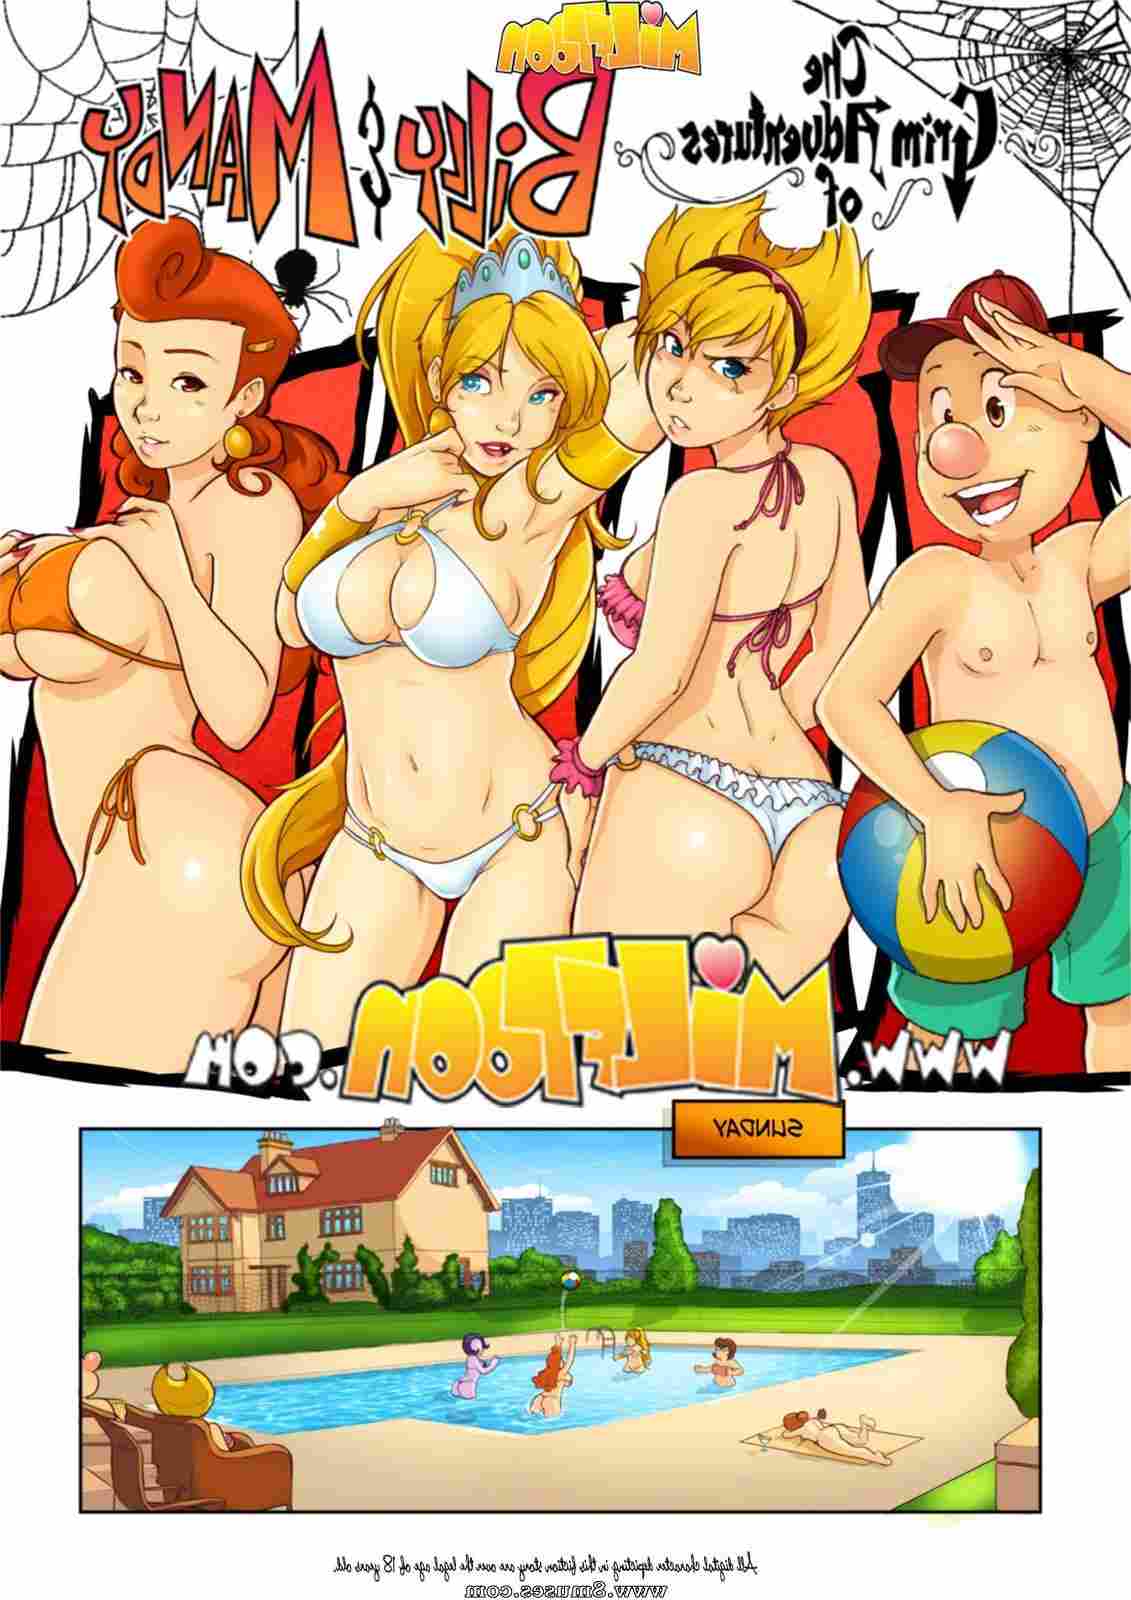 MilfToon-Comics/Billy-and-Mandy Billy_and_Mandy__8muses_-_Sex_and_Porn_Comics.jpg